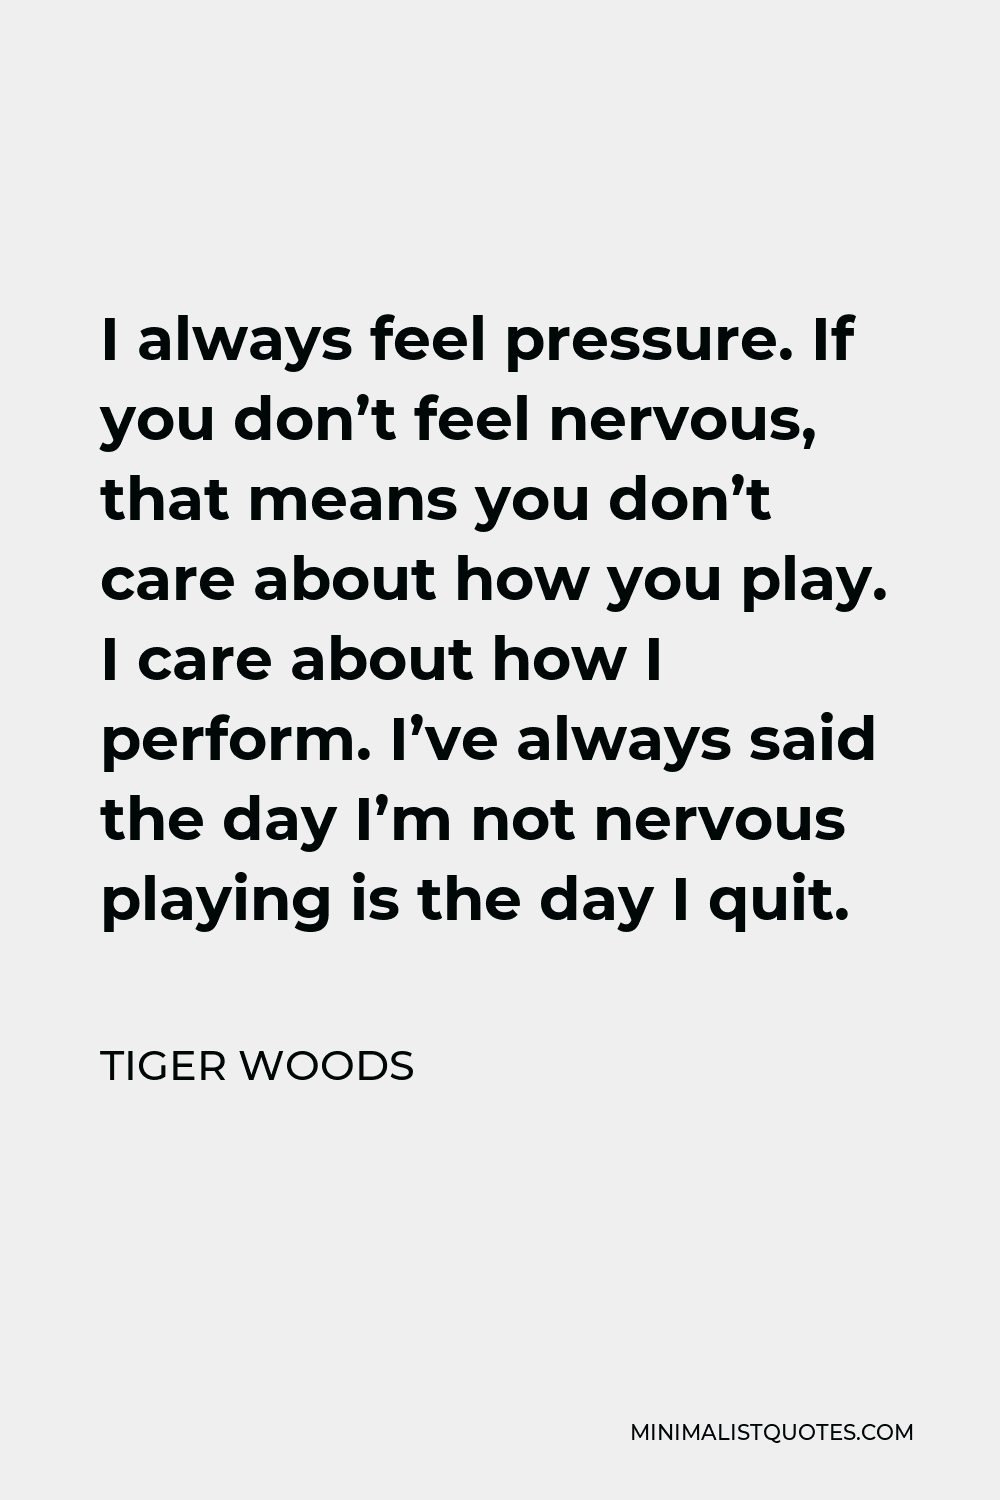 Tiger Woods Quote - I always feel pressure. If you don’t feel nervous, that means you don’t care about how you play. I care about how I perform. I’ve always said the day I’m not nervous playing is the day I quit.